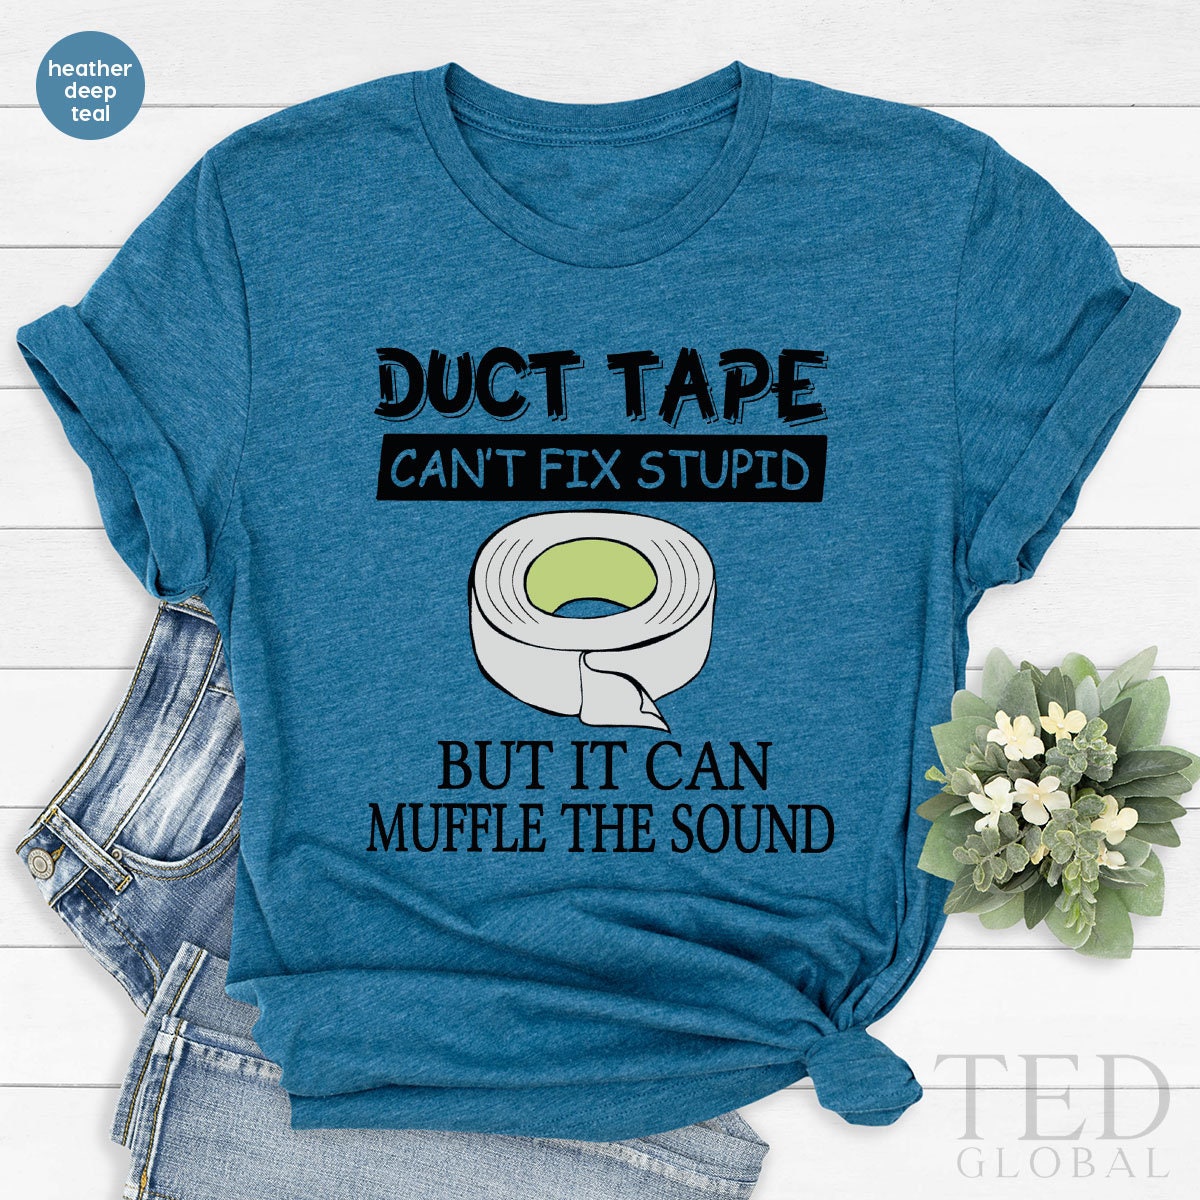 Funny Sarcastic Shirt, Funny Saying T-Shirt, Duct Tape T Shirt, Can't Fix Stupid Shirts, Sarcasm Girl Tee, Humorous T-Shirt, Gift For Her - Fastdeliverytees.com